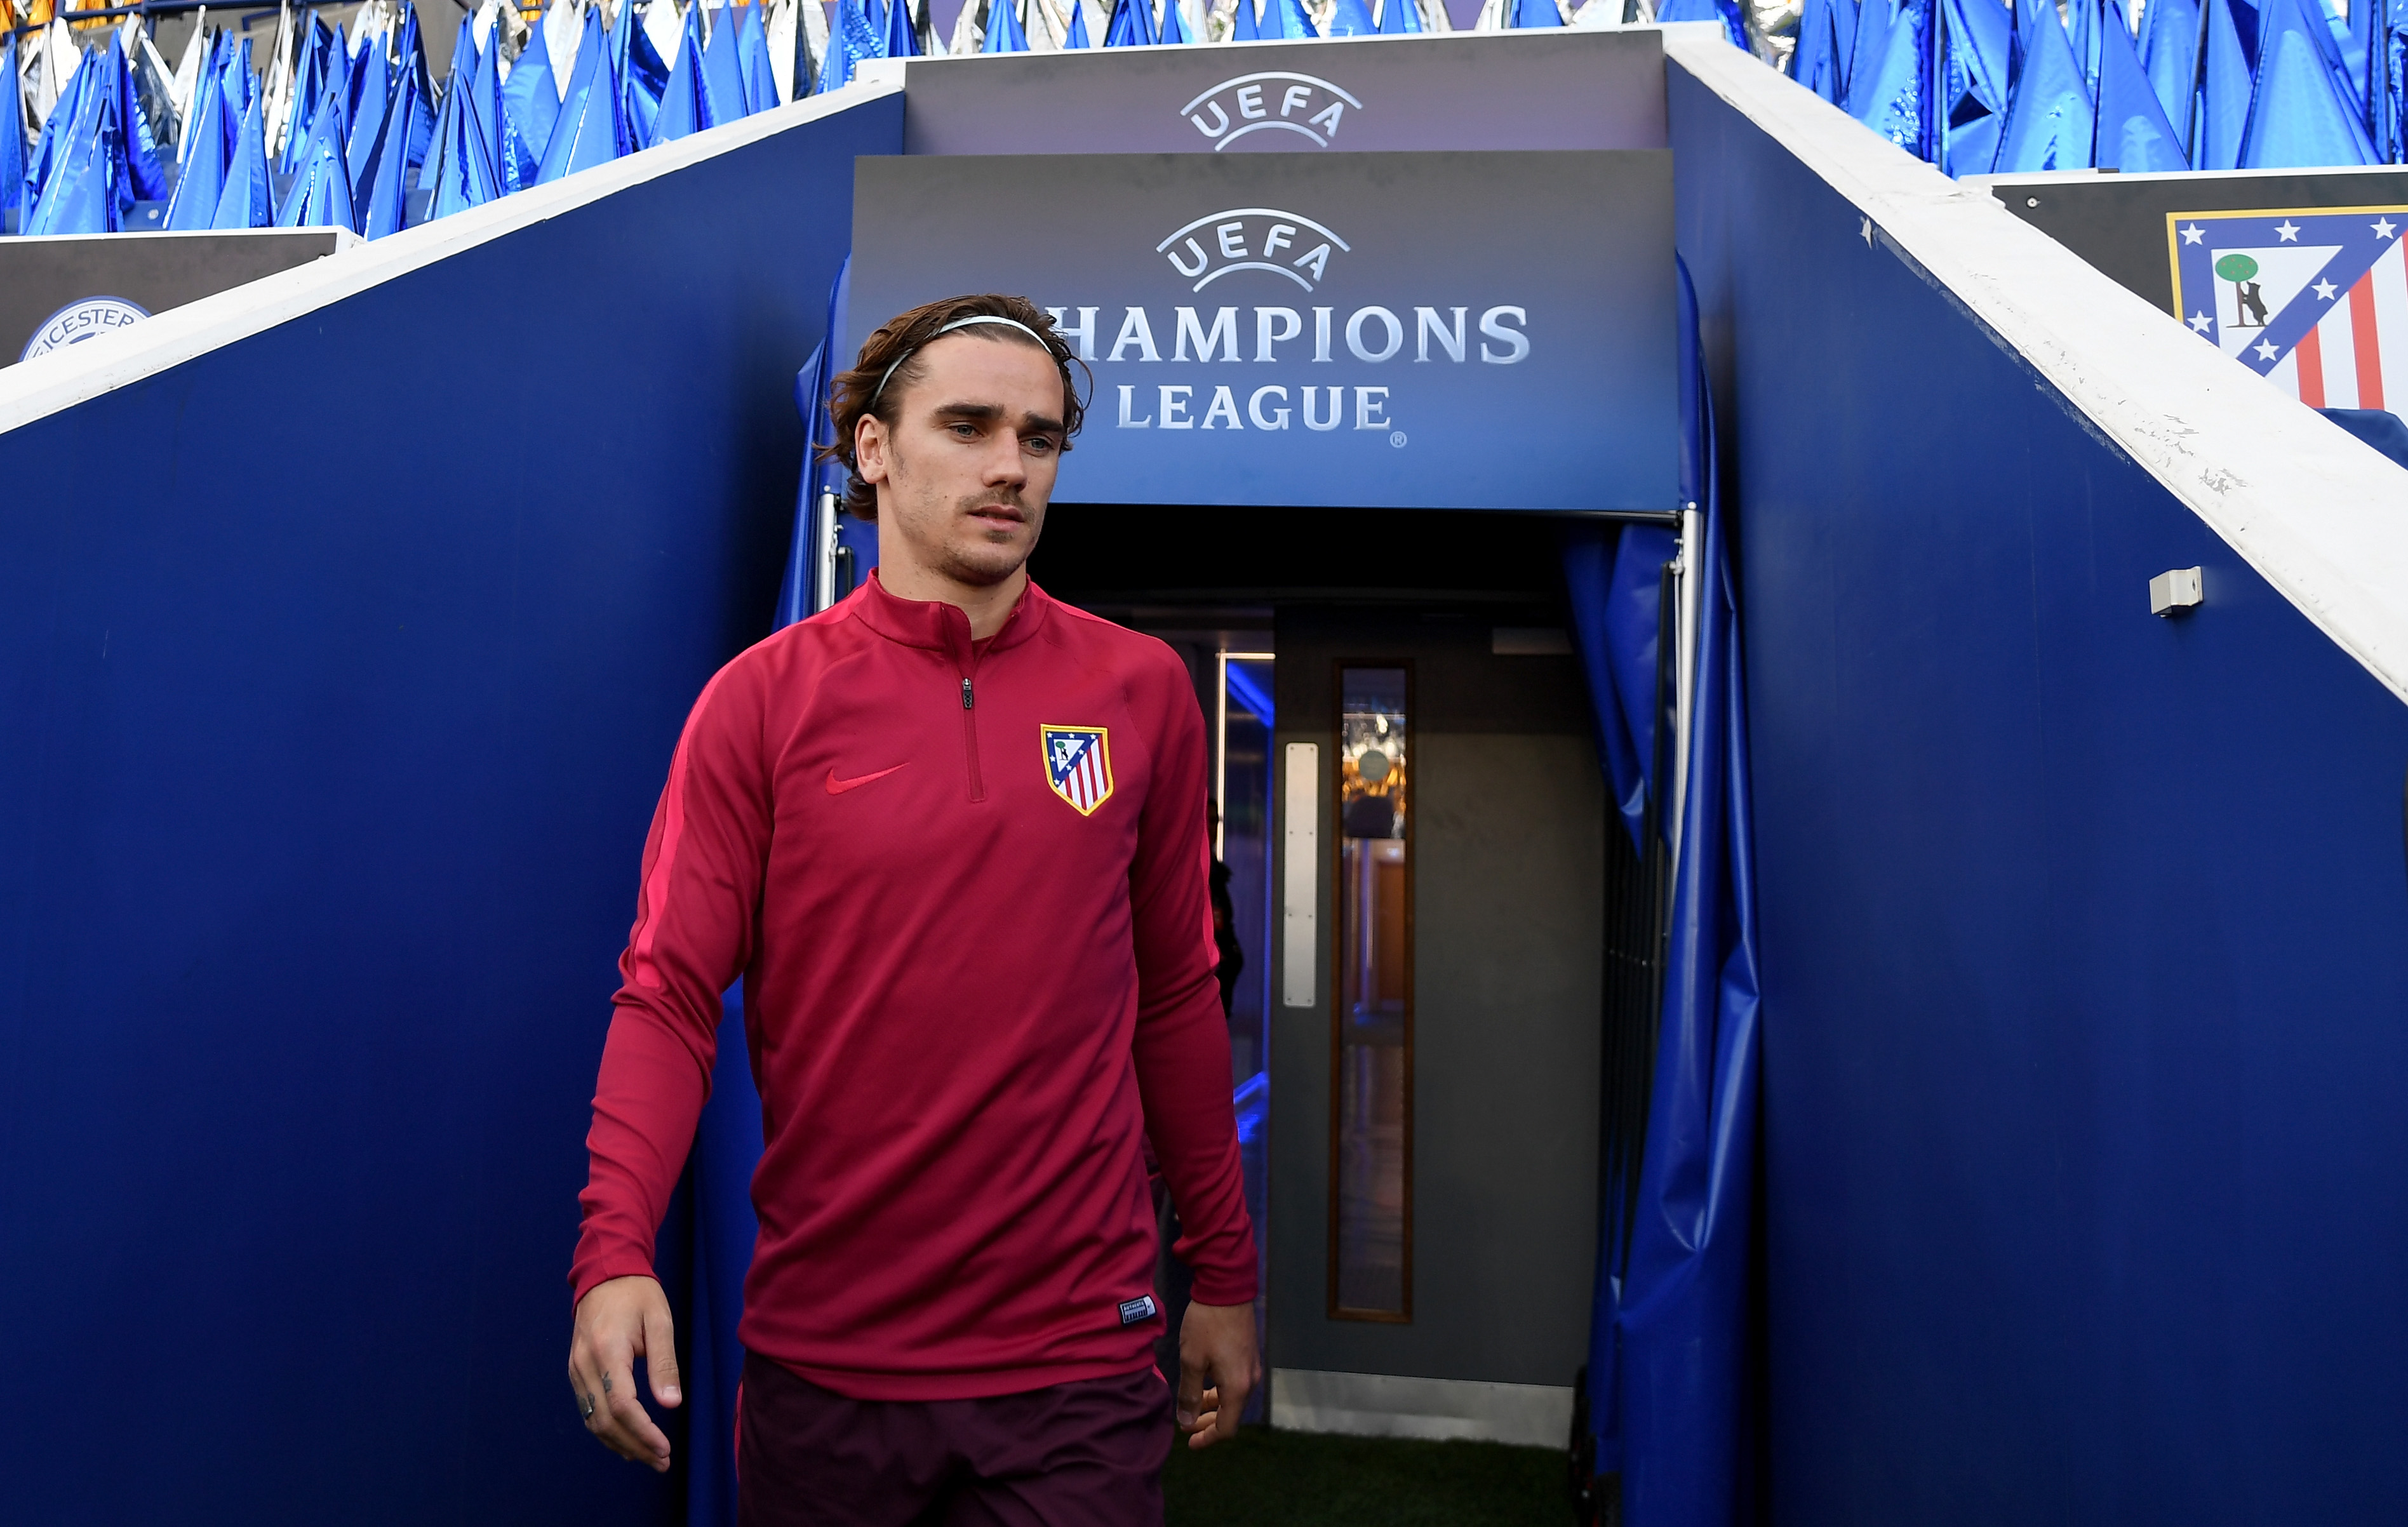 LEICESTER, ENGLAND - APRIL 17:  Antoine Griezmann of Atletico Madrid pictured during a training session at The King Power Stadium on April 17, 2017 in Leicester, England.  (Photo by Ross Kinnaird/Getty Images)